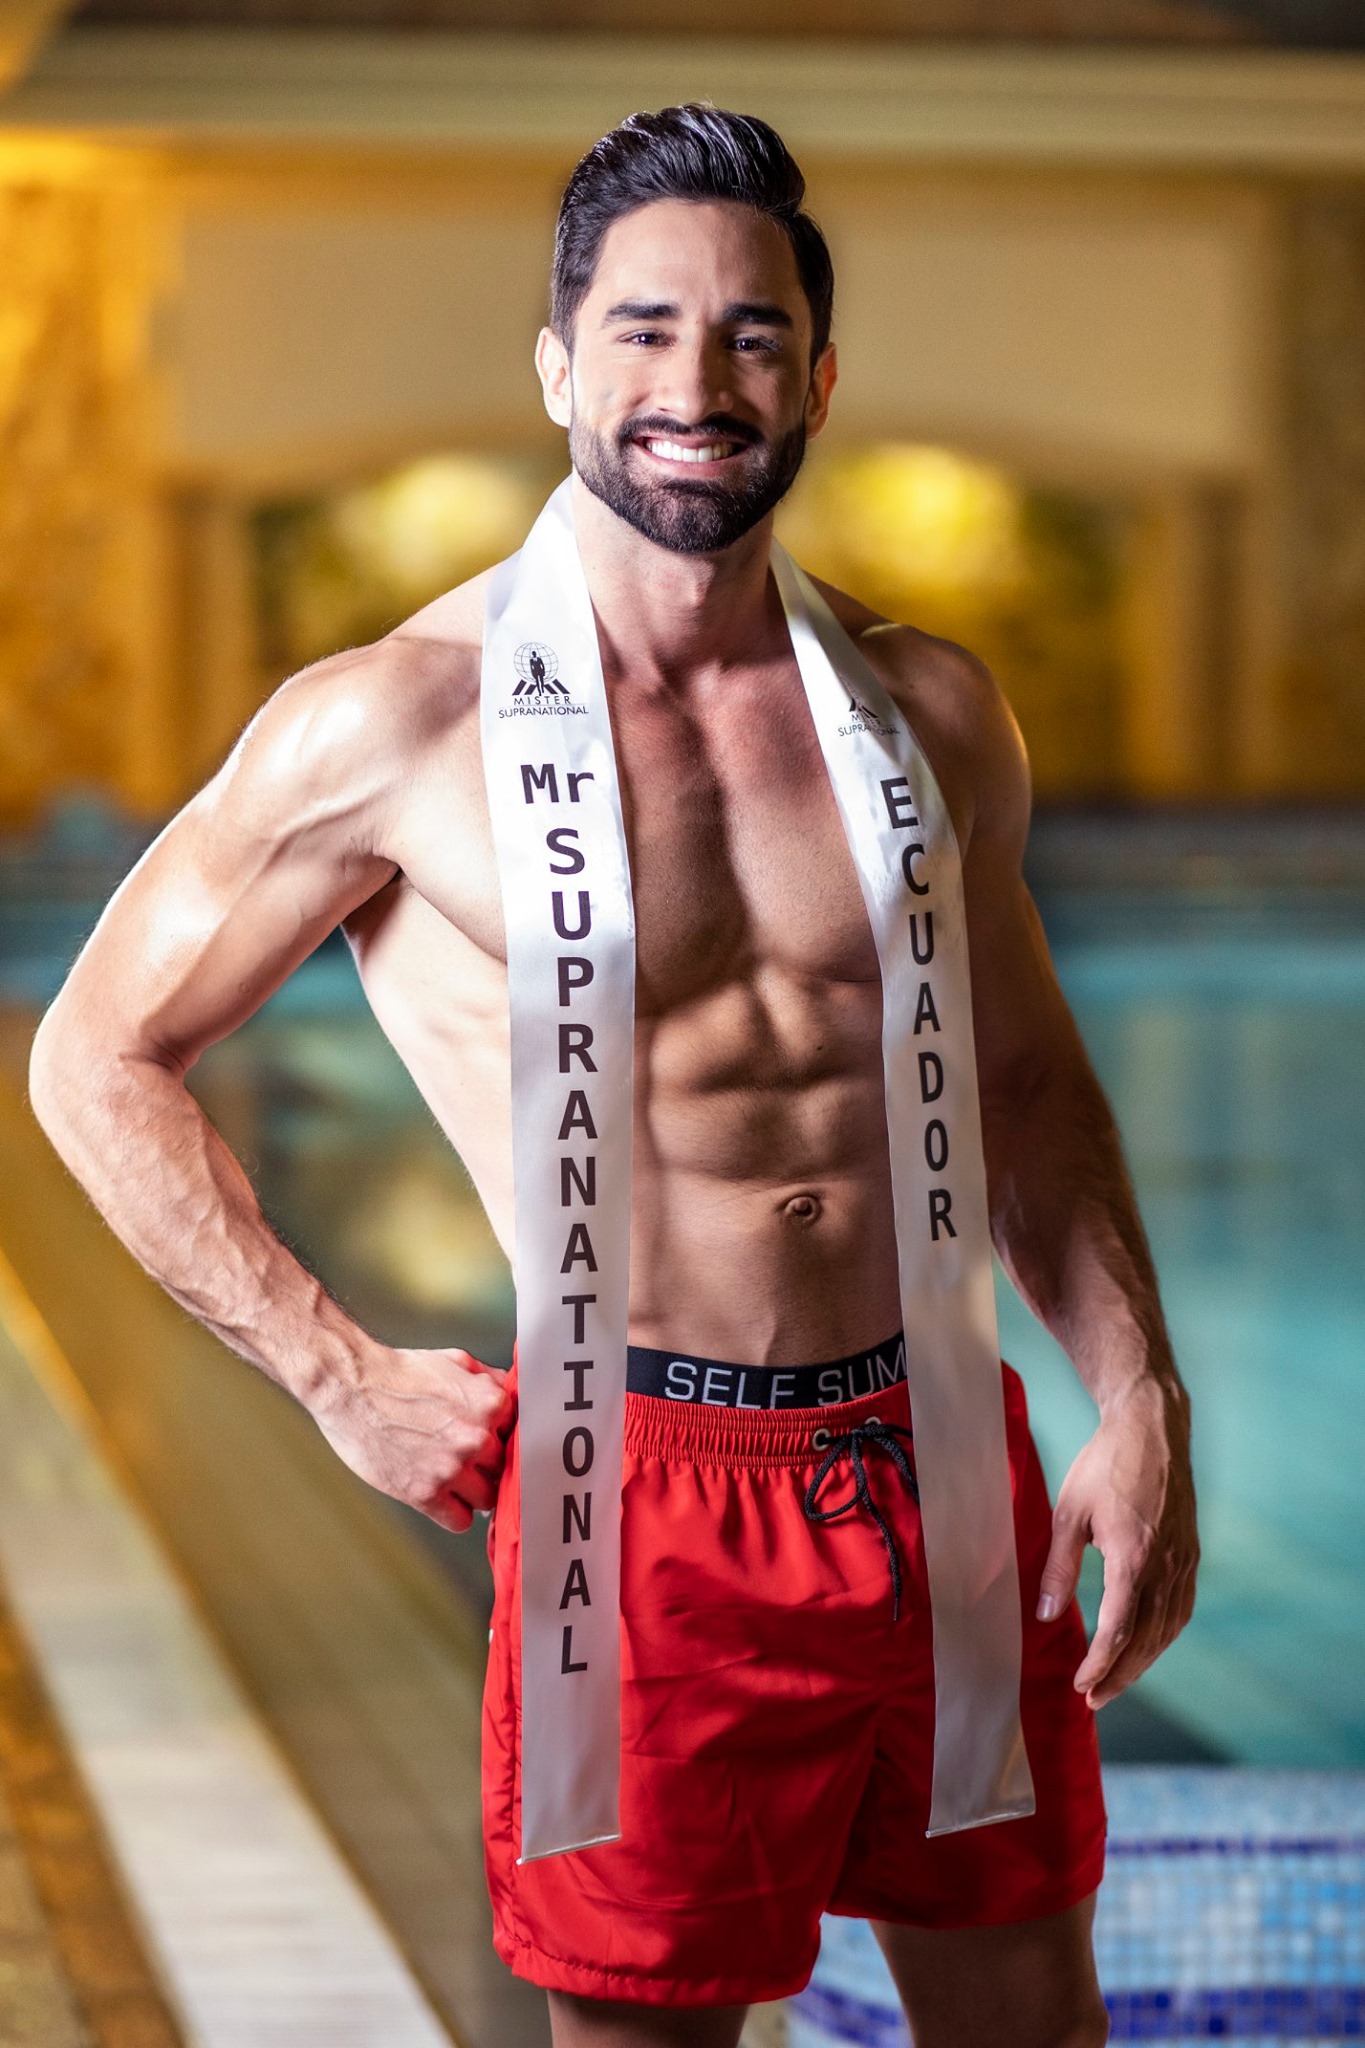 Mister Supranational 2019 Official Swimwear 011